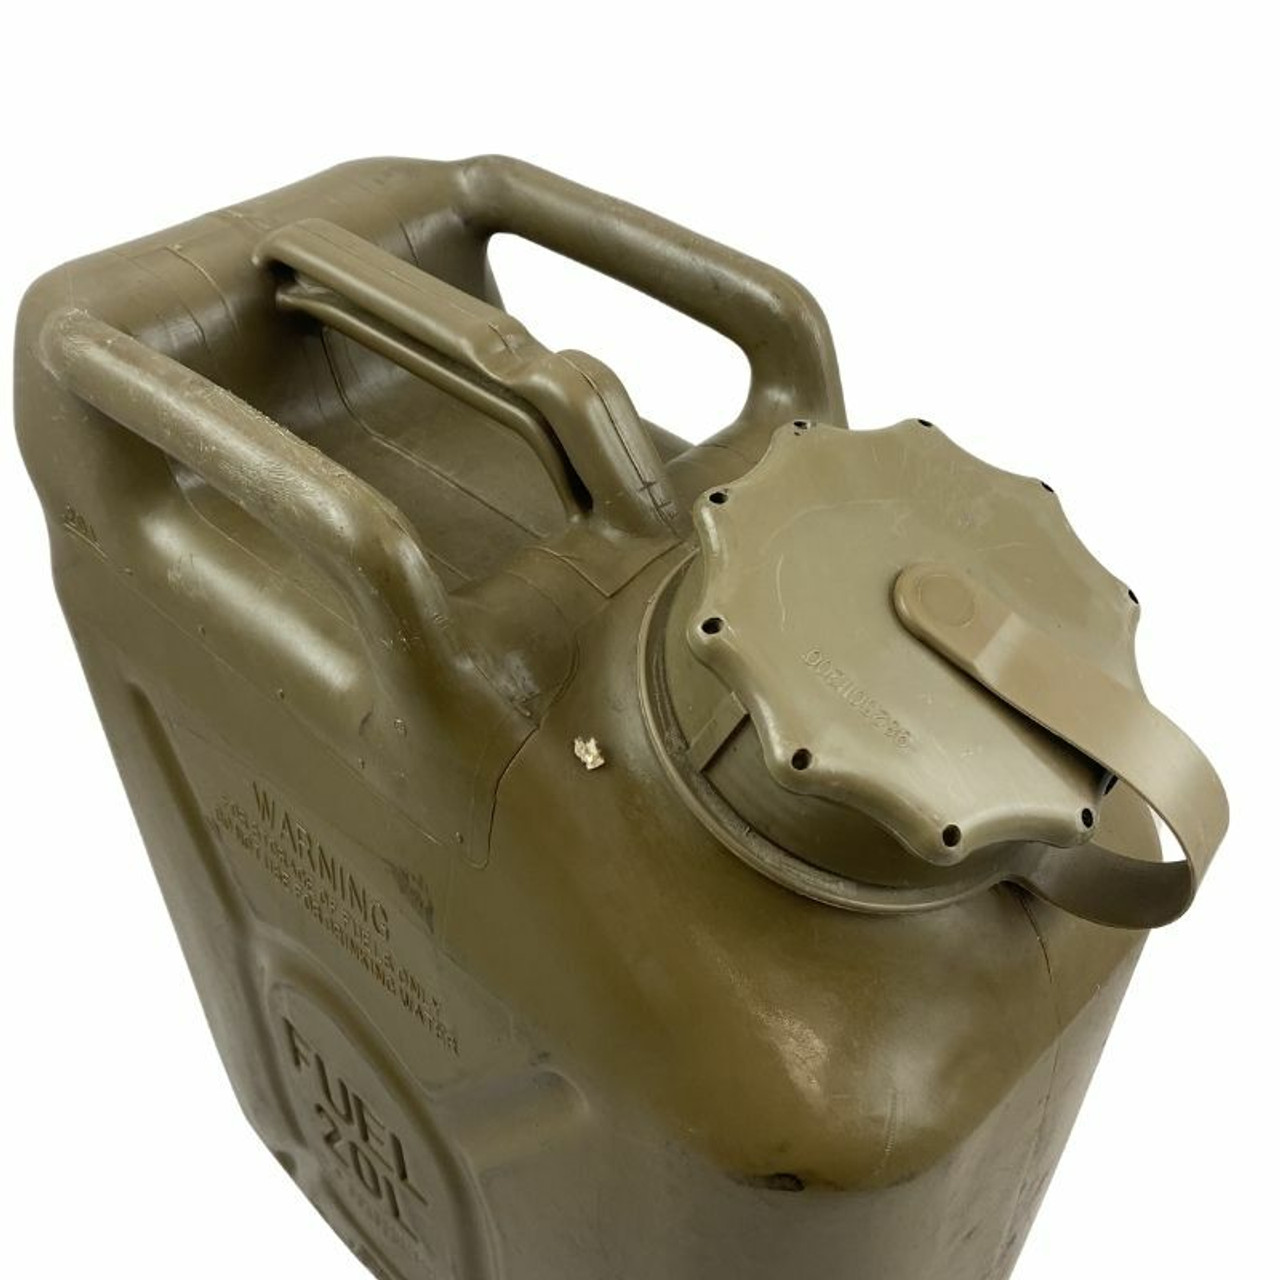 Scepter Military Issue 5 Gallon Plastic Fuel Can, Used